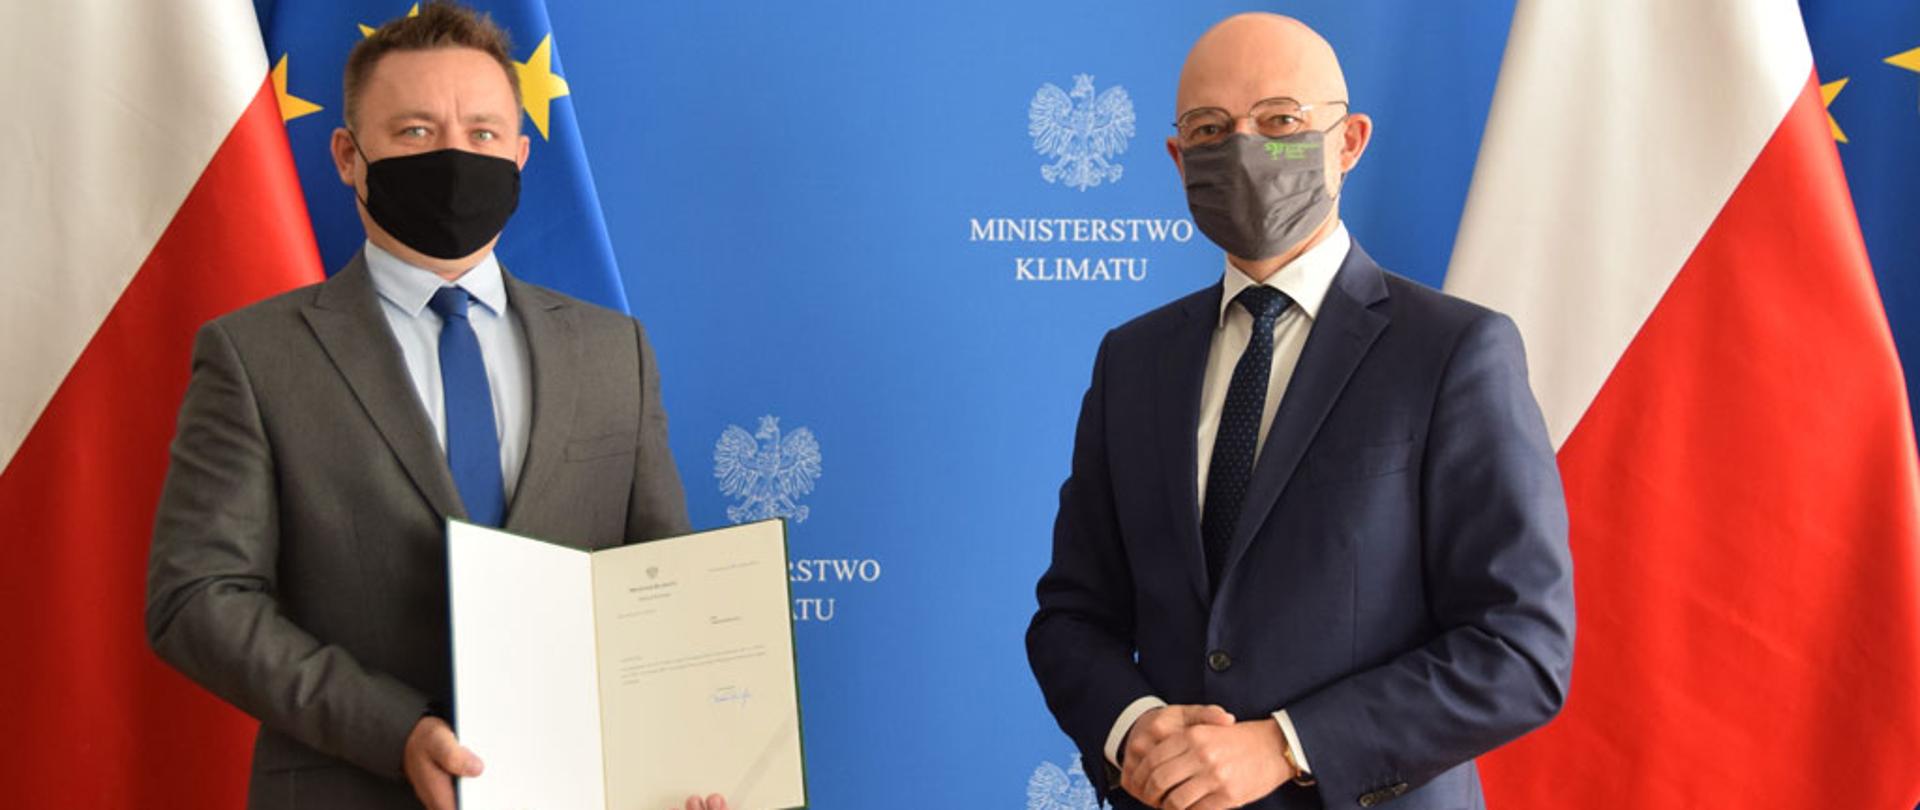 Minister of Climate Michał Kurtyka, upon request of Dr Łukasz Młynarkiewicz, the President of the National Atomic Energy Agency (PAA), has appointed Andrzej Głowacki, formerly the Director of the PAA Nuclear Safety and Security Department, to the position of Vice-President of the National Atomic Energy Agency.